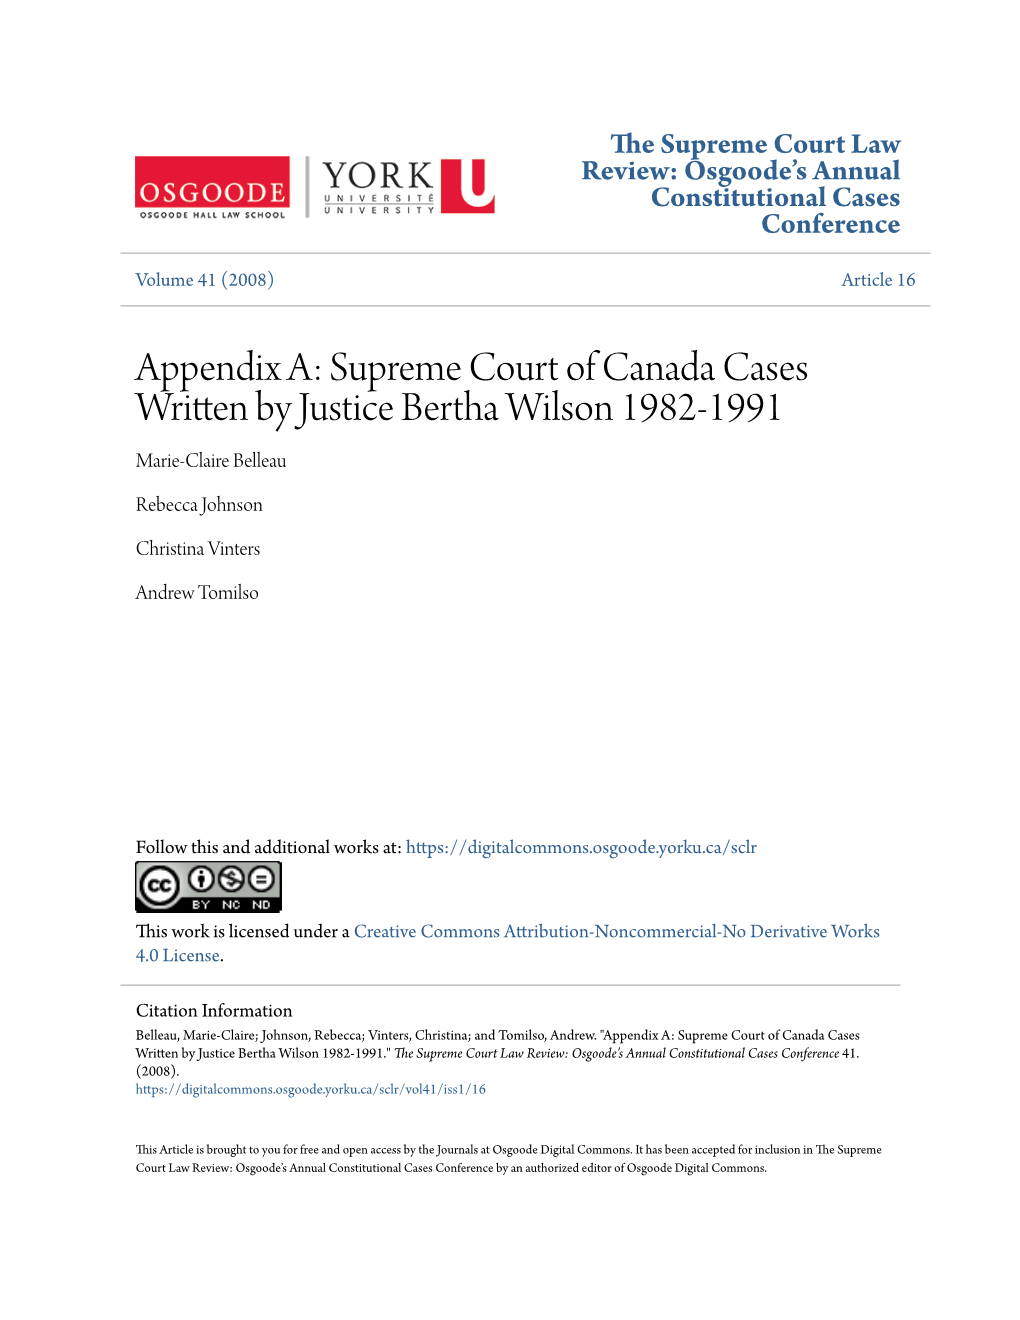 Supreme Court of Canada Cases Written by Justice Bertha Wilson 1982-1991 Marie-Claire Belleau